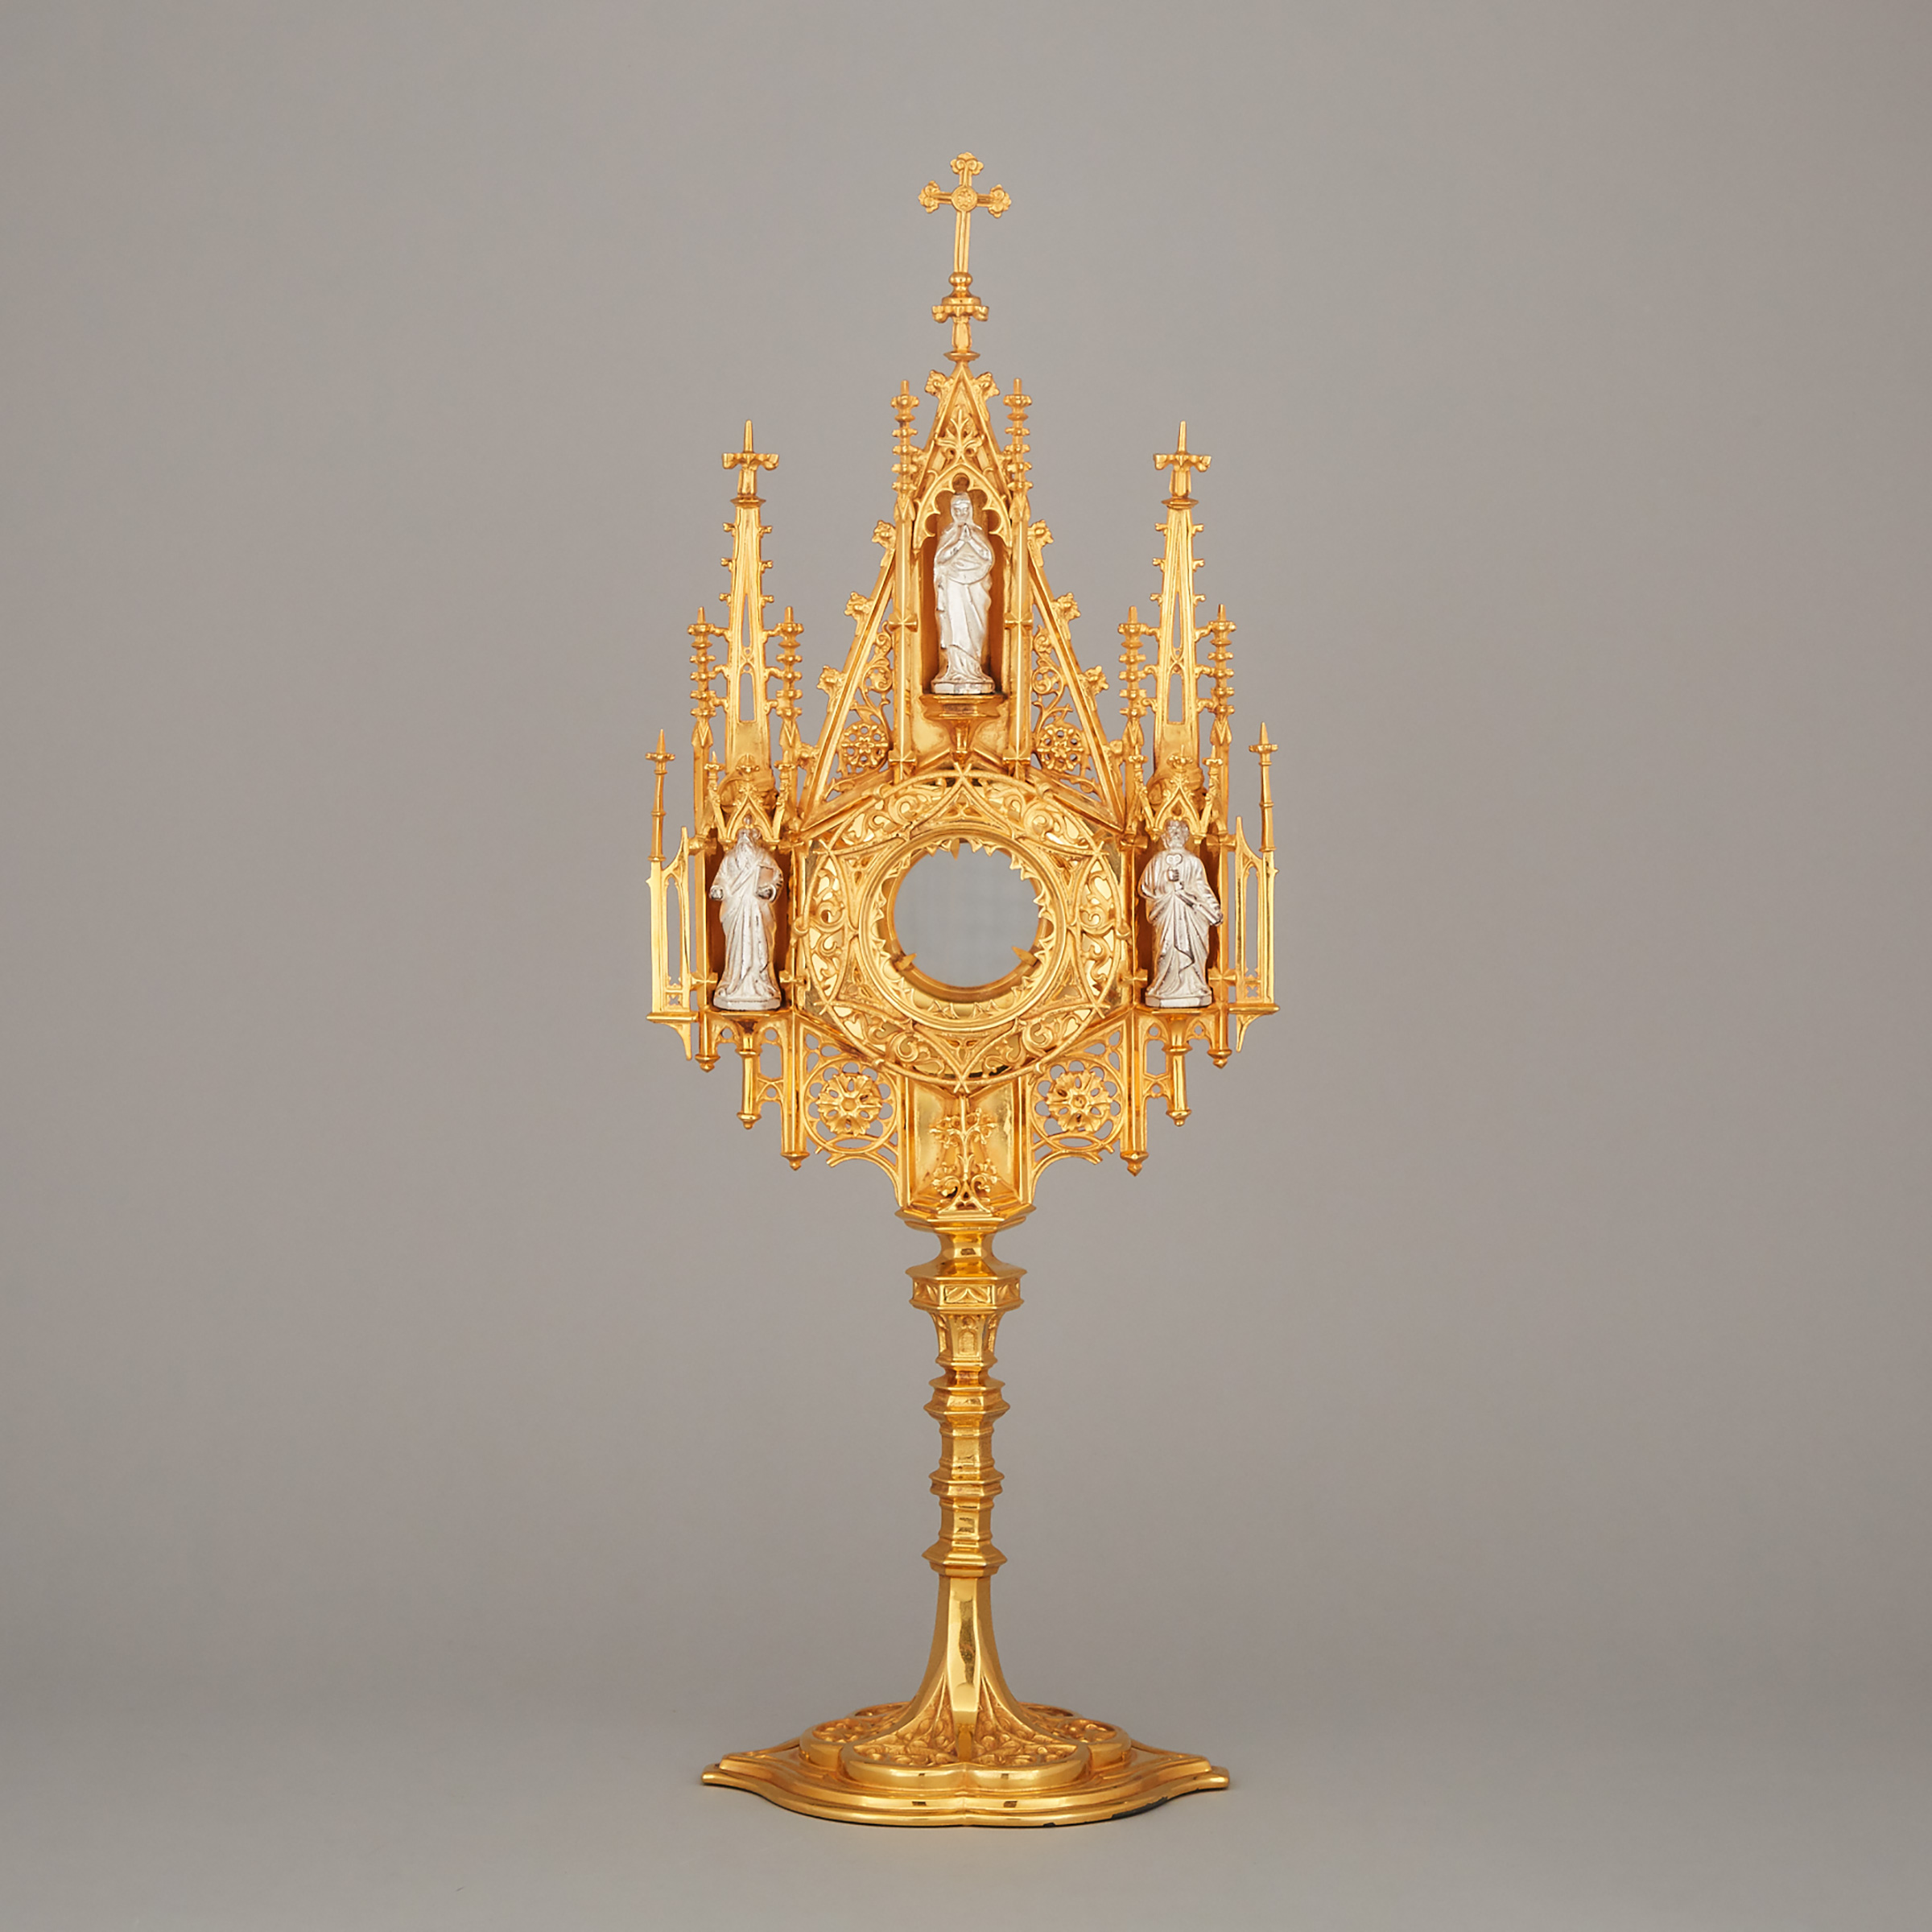 Canadian Gothic Gilt and Silvered Metal Monstrance, Meriden Britannia Co. Hamilton, Ont., early-mid 20th century